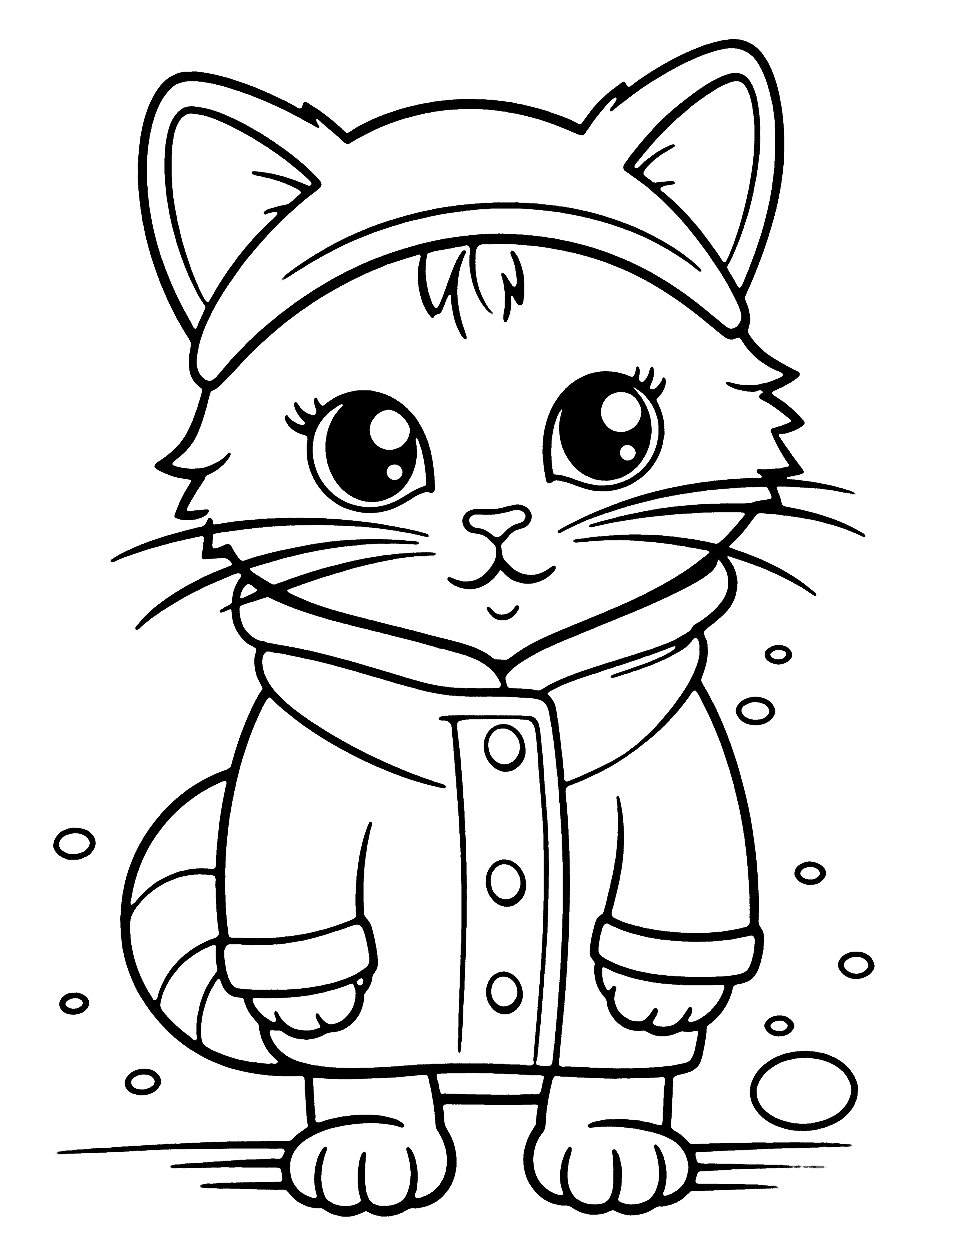 Cat in a Raincoat Coloring Page - A preschool coloring page of a cute image of a cat in a raincoat and boots, splashing in puddles.